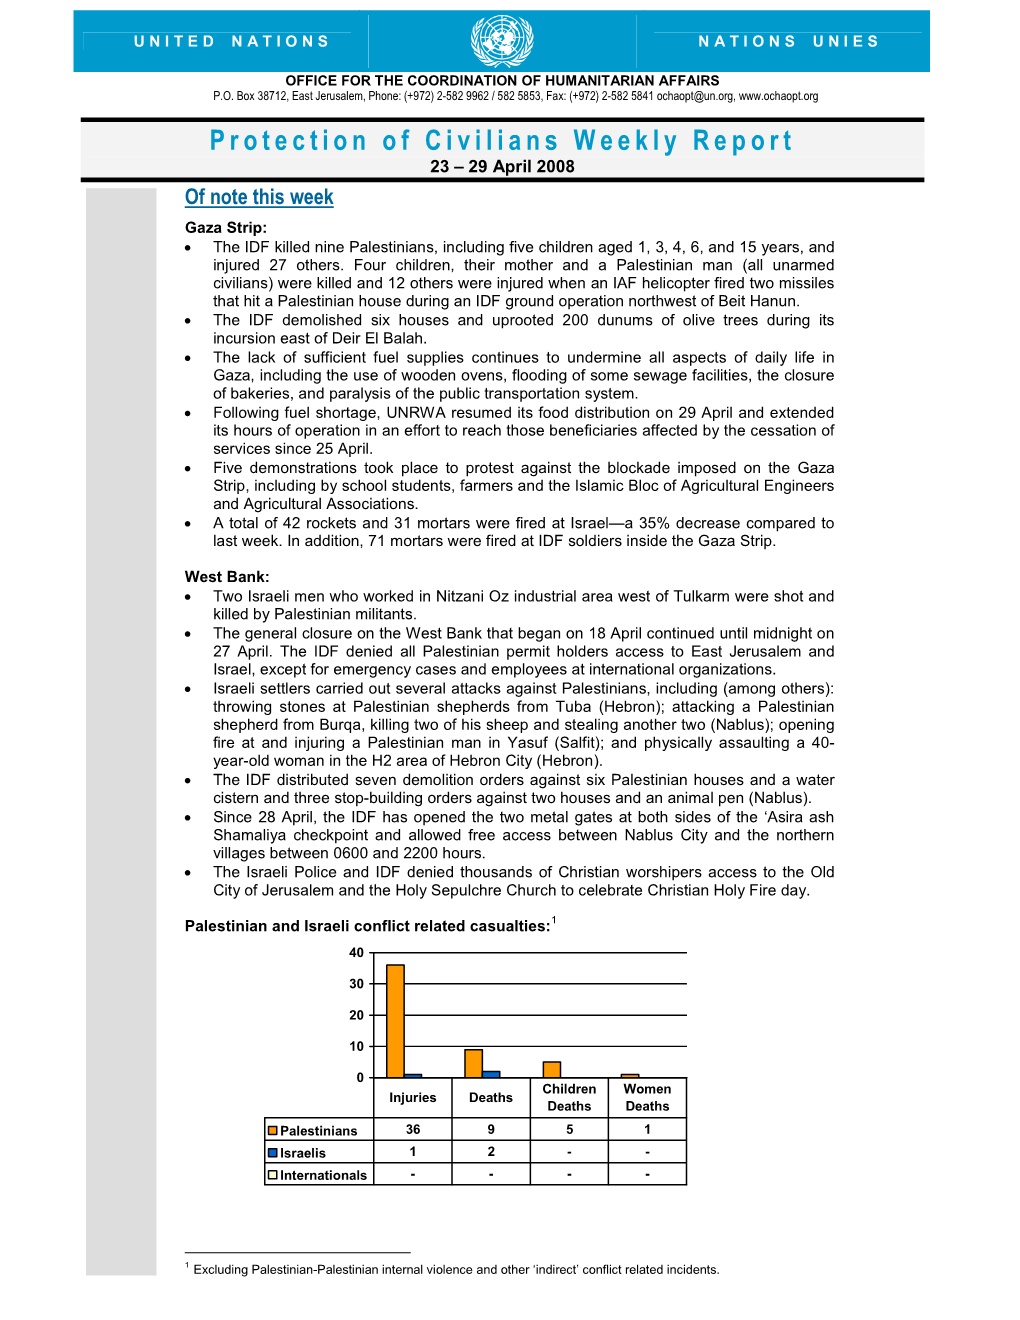 Protection of Civilians Weekly Report 23